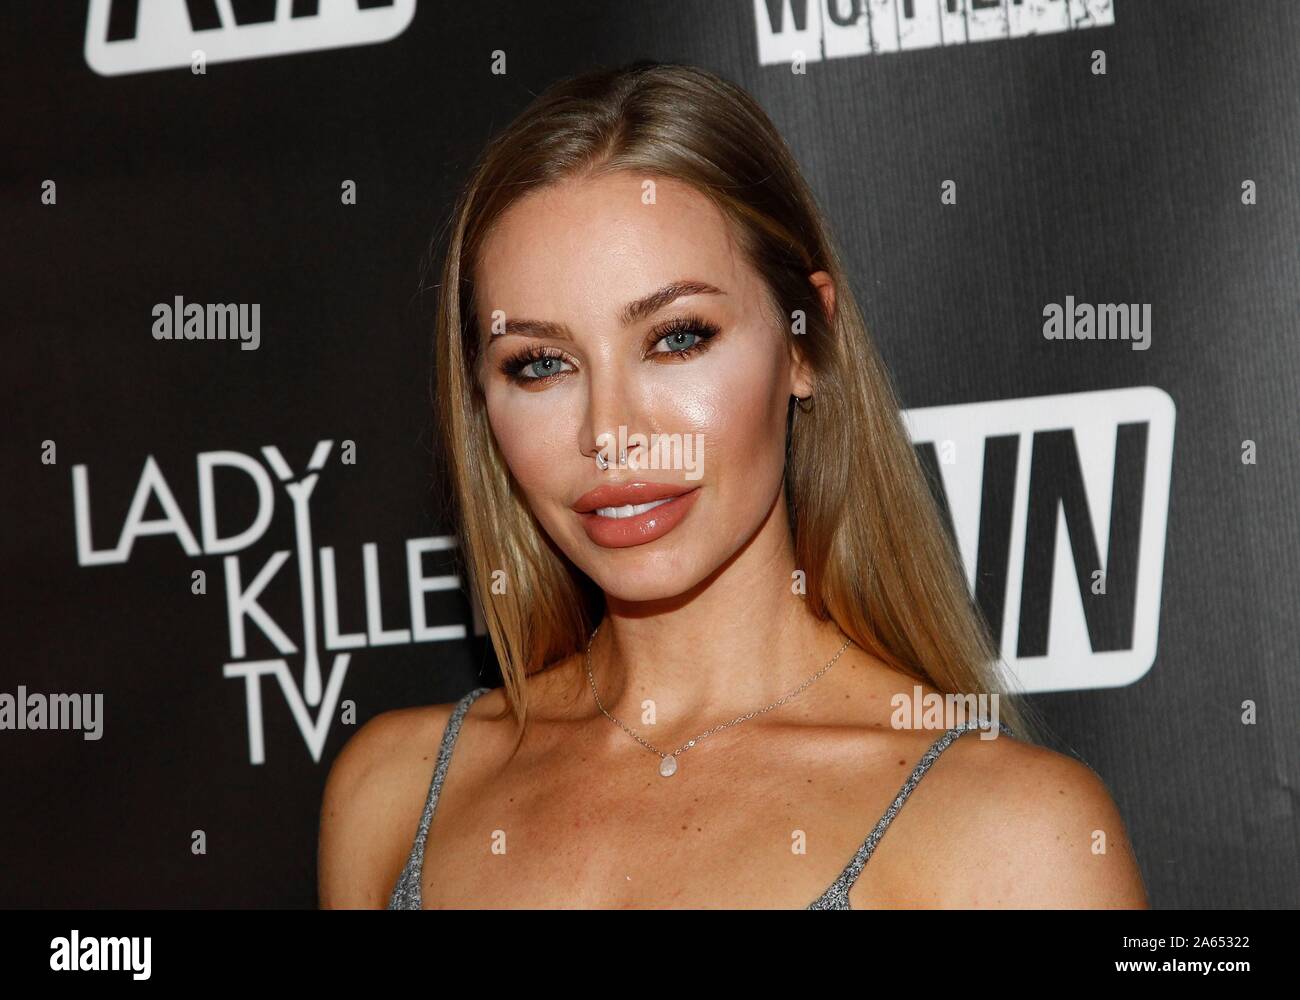 Las Vegas, NV, USA. 23rd Oct, 2019. Nicole Aniston at arrivals for LADY KILLER TV Premiere, Brenden Theater at Palms Casino Resort, Las Vegas, NV October 23, 2019. Credit: JA/Everett Collection/Alamy Live News Stock Photo